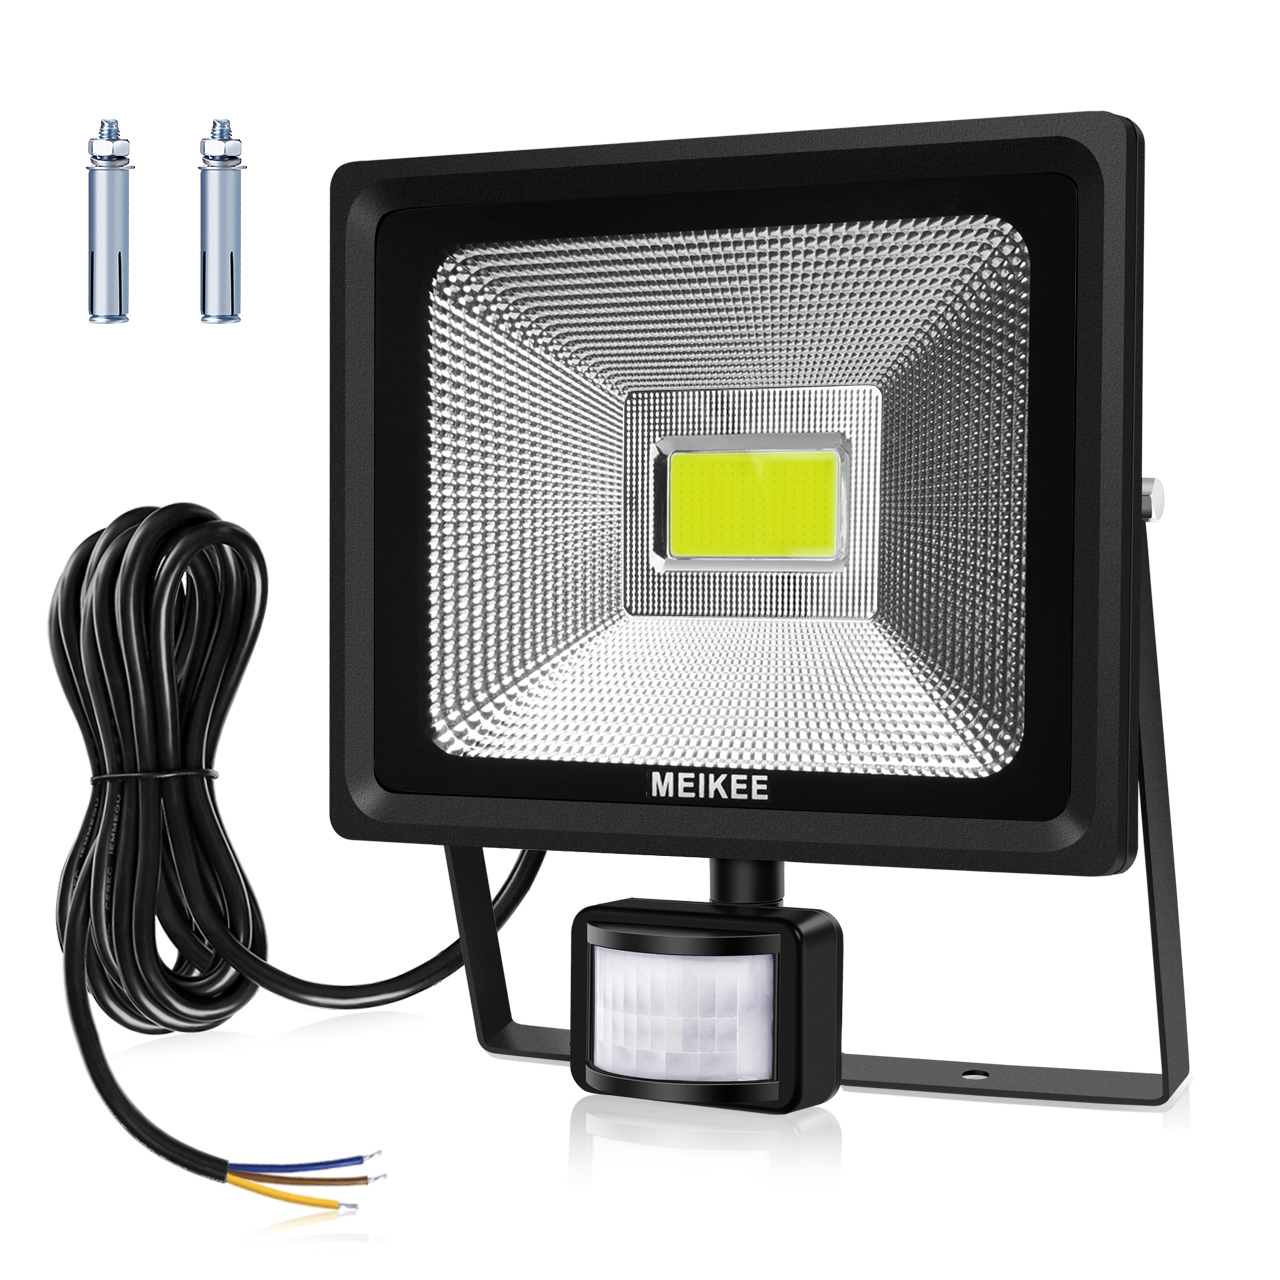 50W Security Lights with Motion Sensor